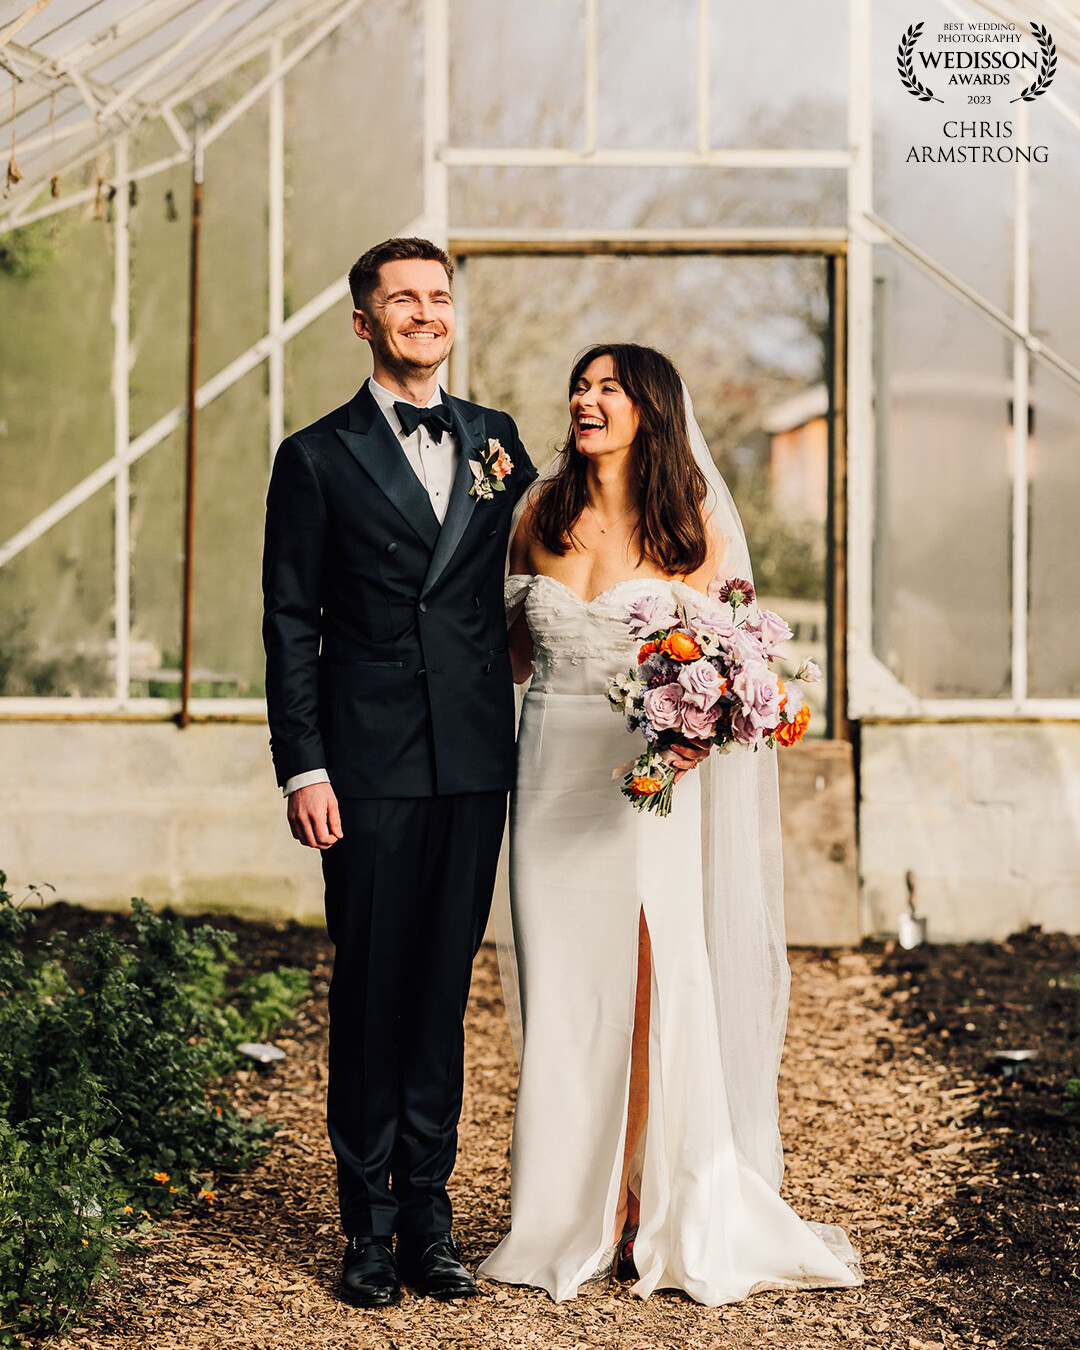 Hannah and Mike got married at the wonderful Cornish Wedding venue Nancarrow. The weather had been pretty poor with heavy rain in the morning, but we were treated to some great springtime sunshine in the afternoon. This working farm's greenhouse gave an extra bit of dreamy soft light for their couple shoot!